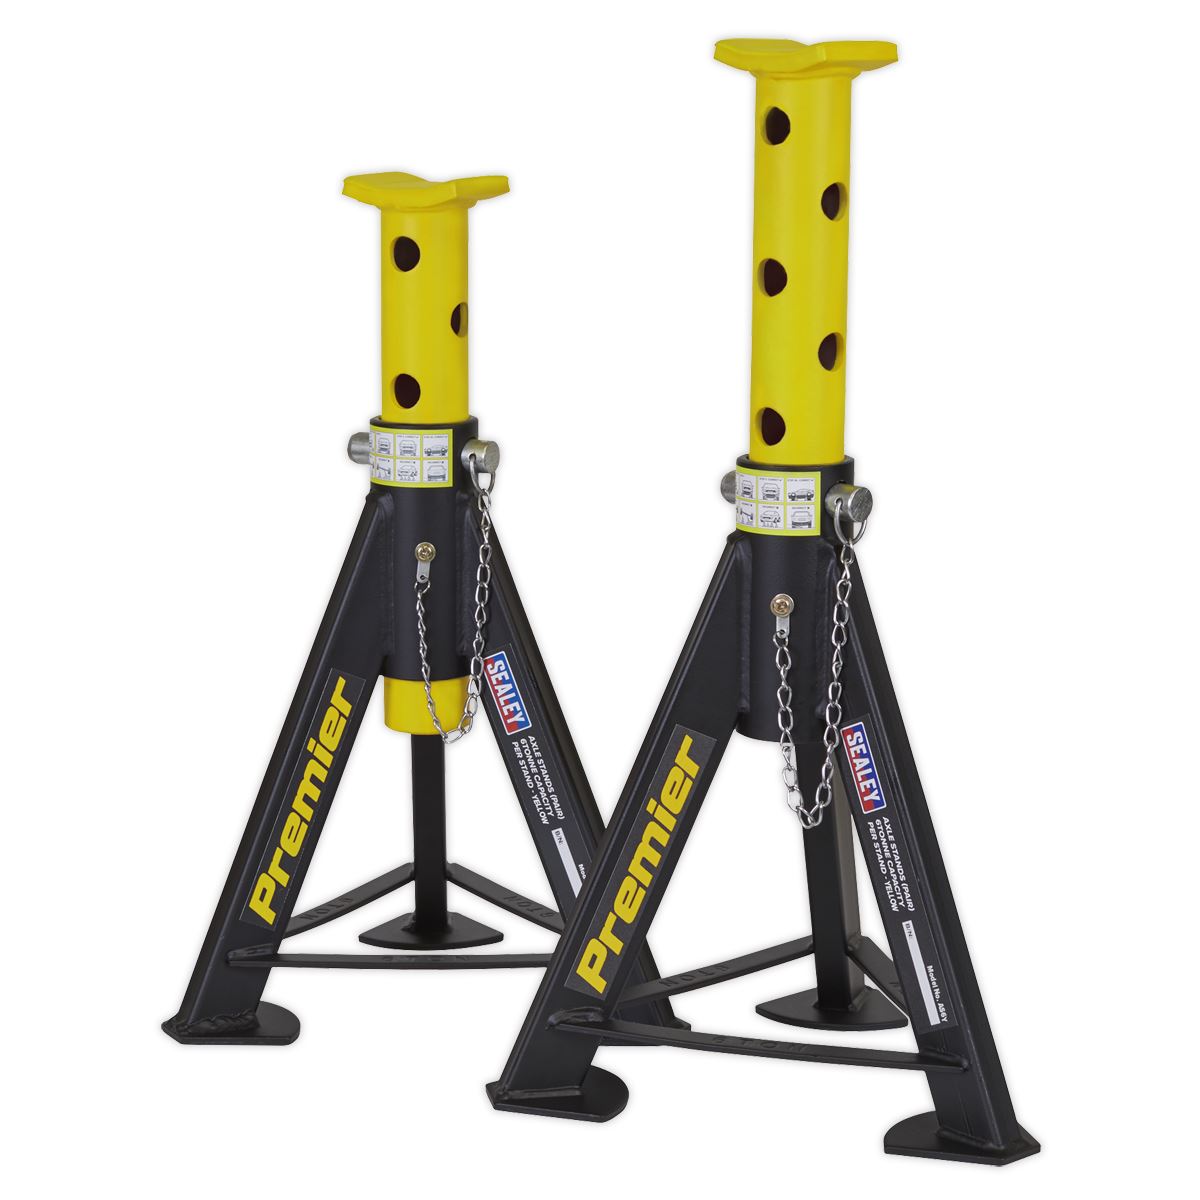 Sealey Premier Axle Stands (Pair) 6 Tonne Capacity per Stand - Yellow